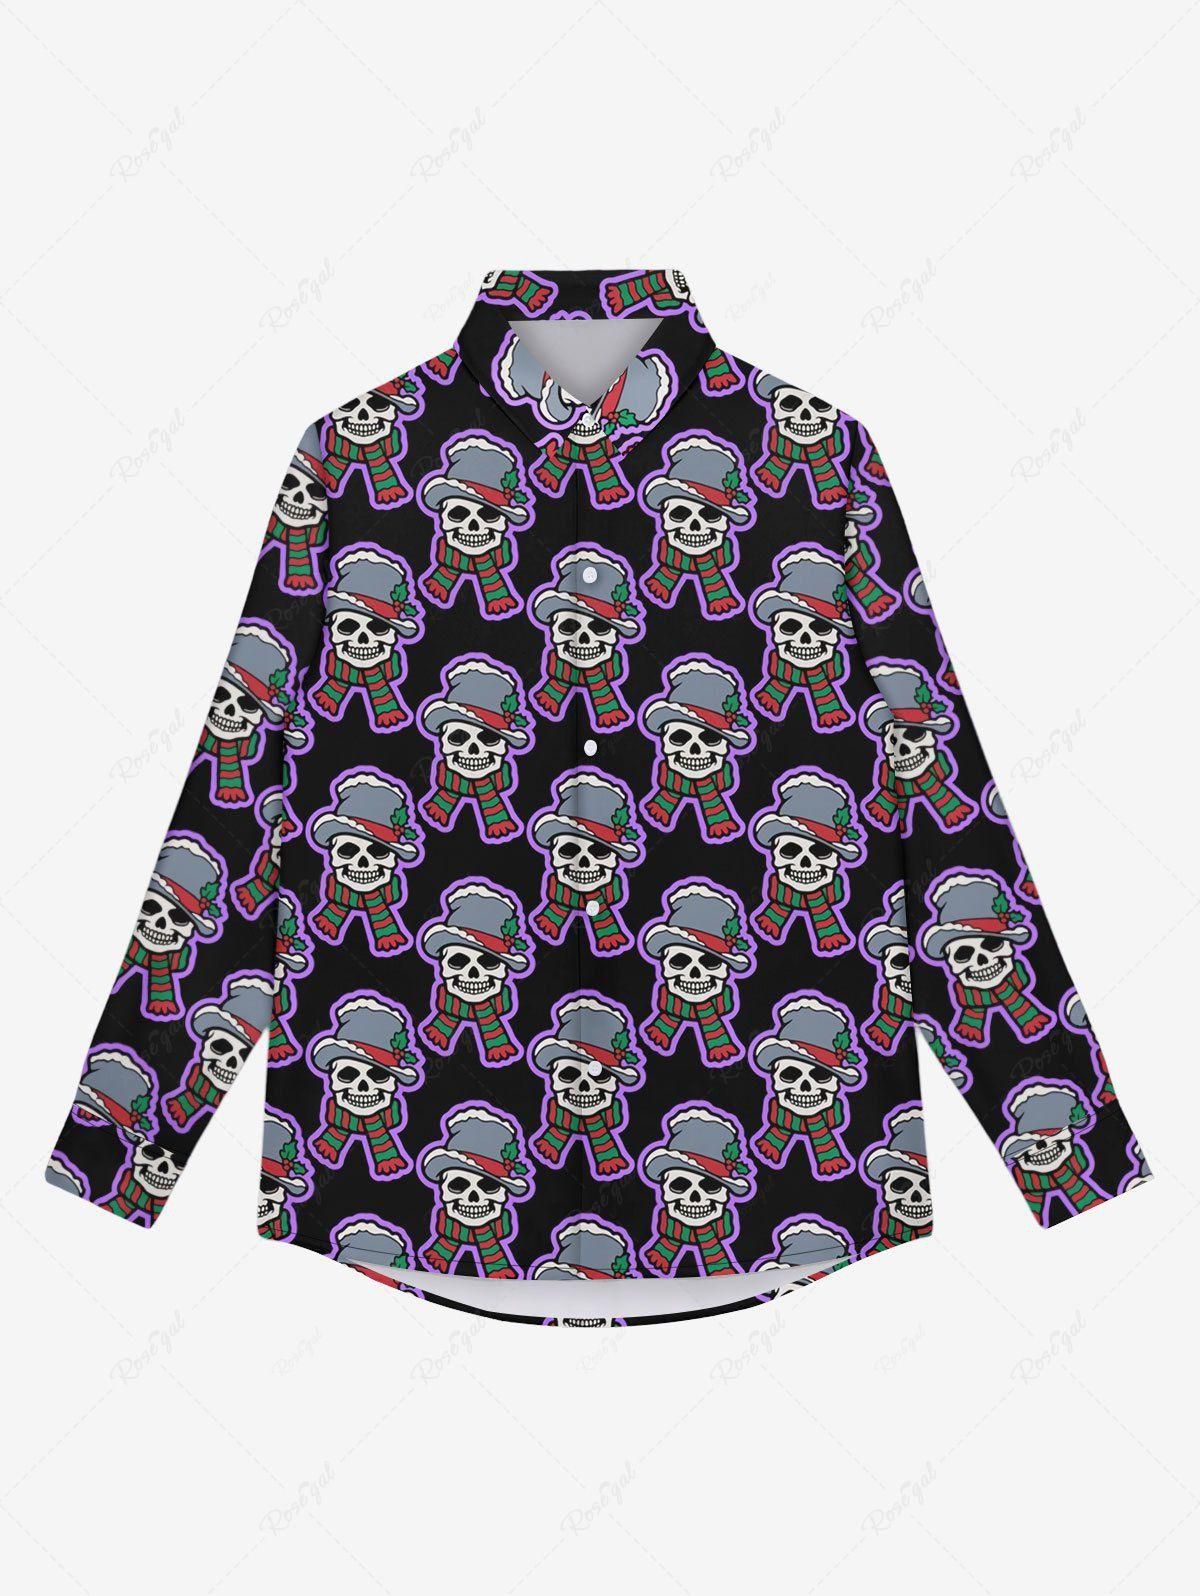 Gothic Christmas Hat Scarf Skull Print Buttons Shirt For Men - 3xl